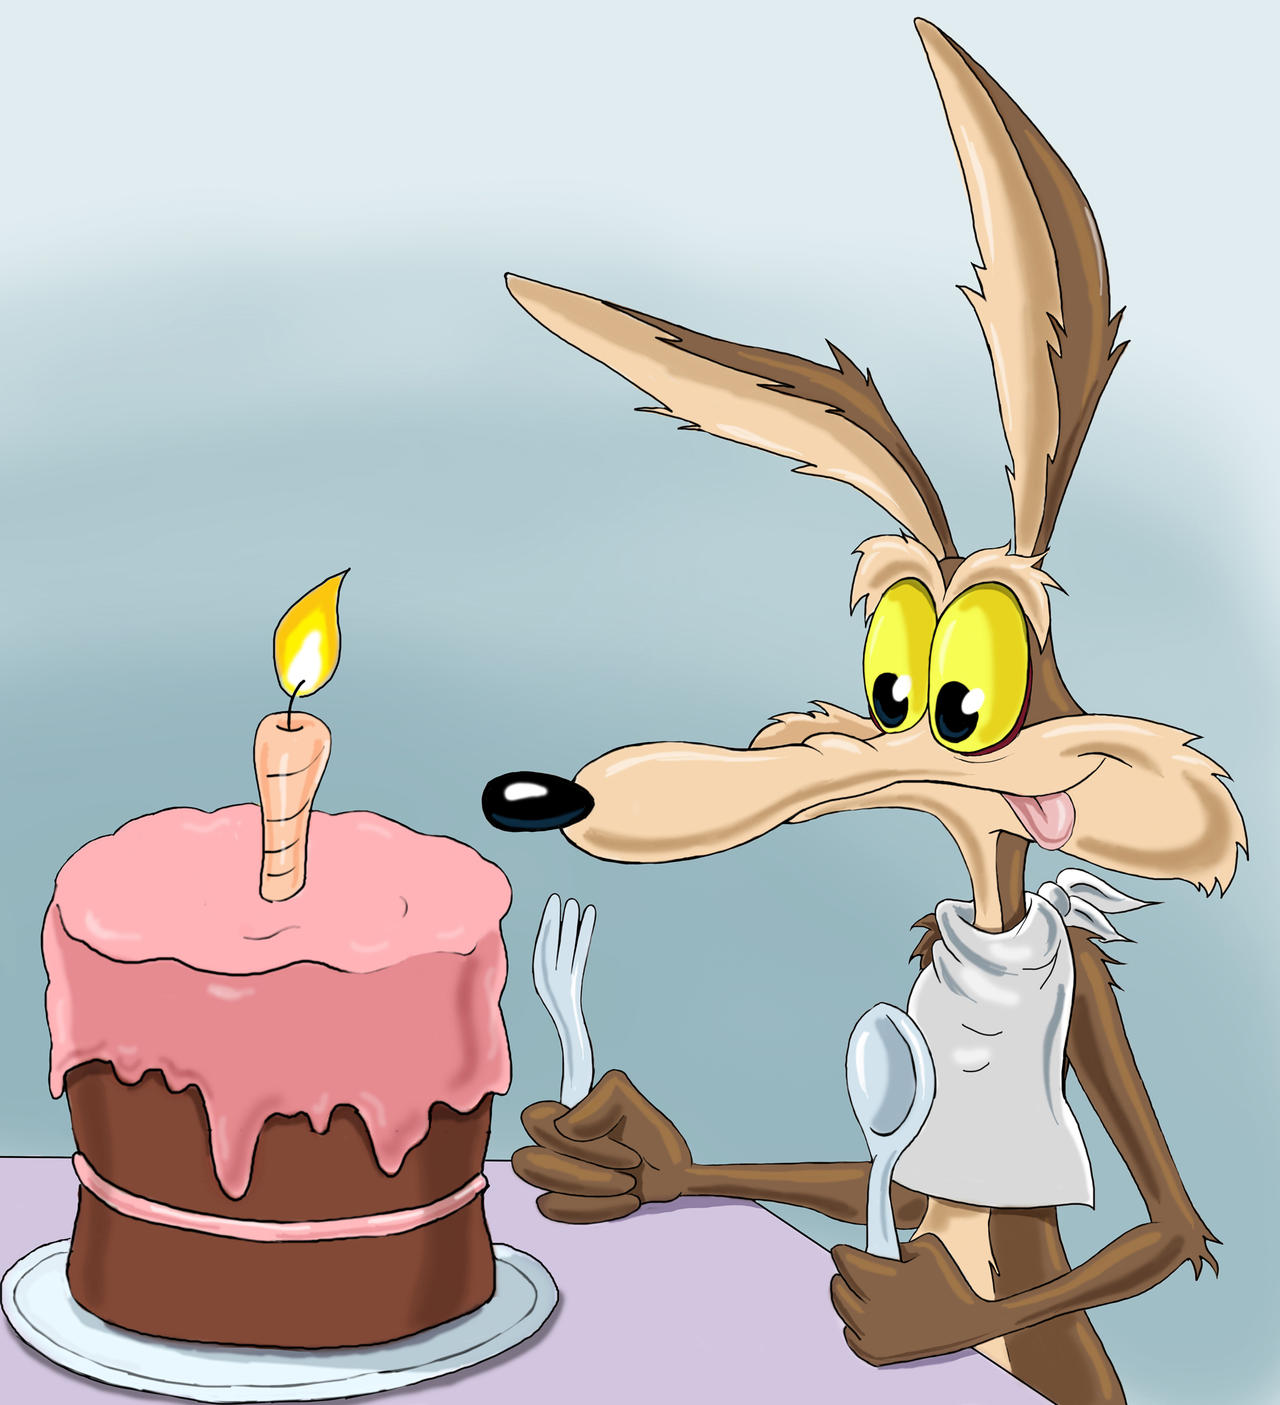 Wile E. Coyote by zdrer456 on DeviantArt